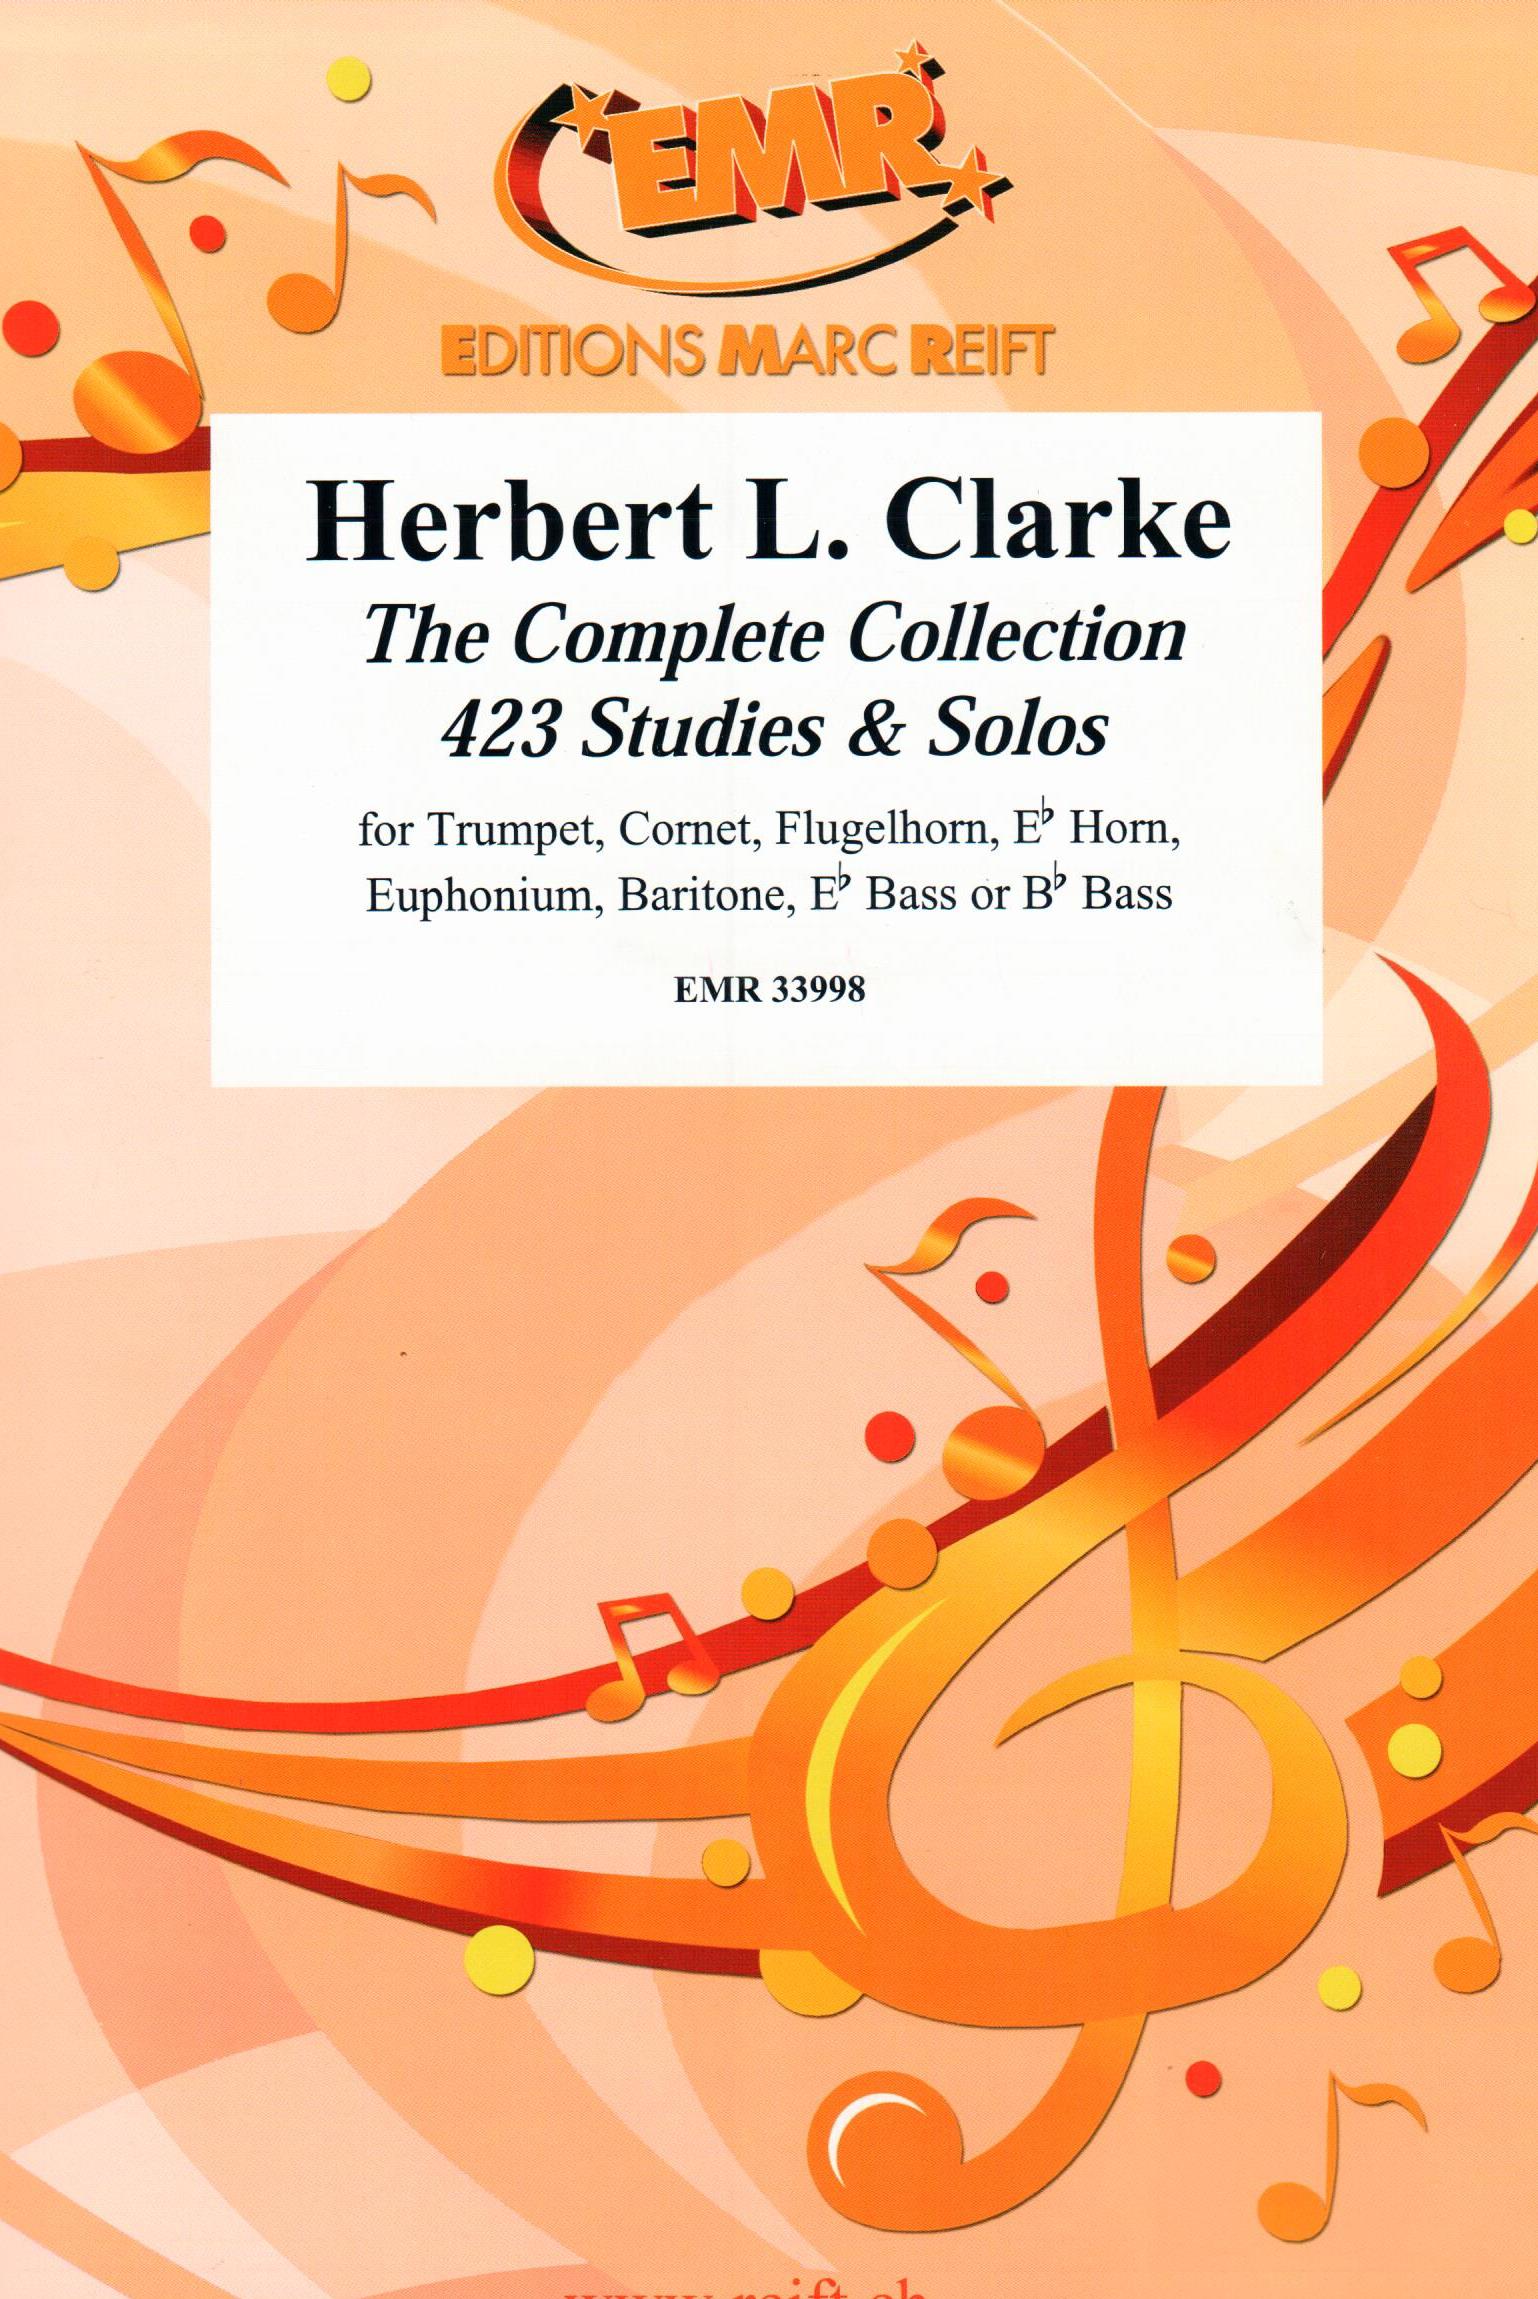 THE COMPLETE COLLECTION 423 STUDIES & SOLOS, SOLOS - Euphonium